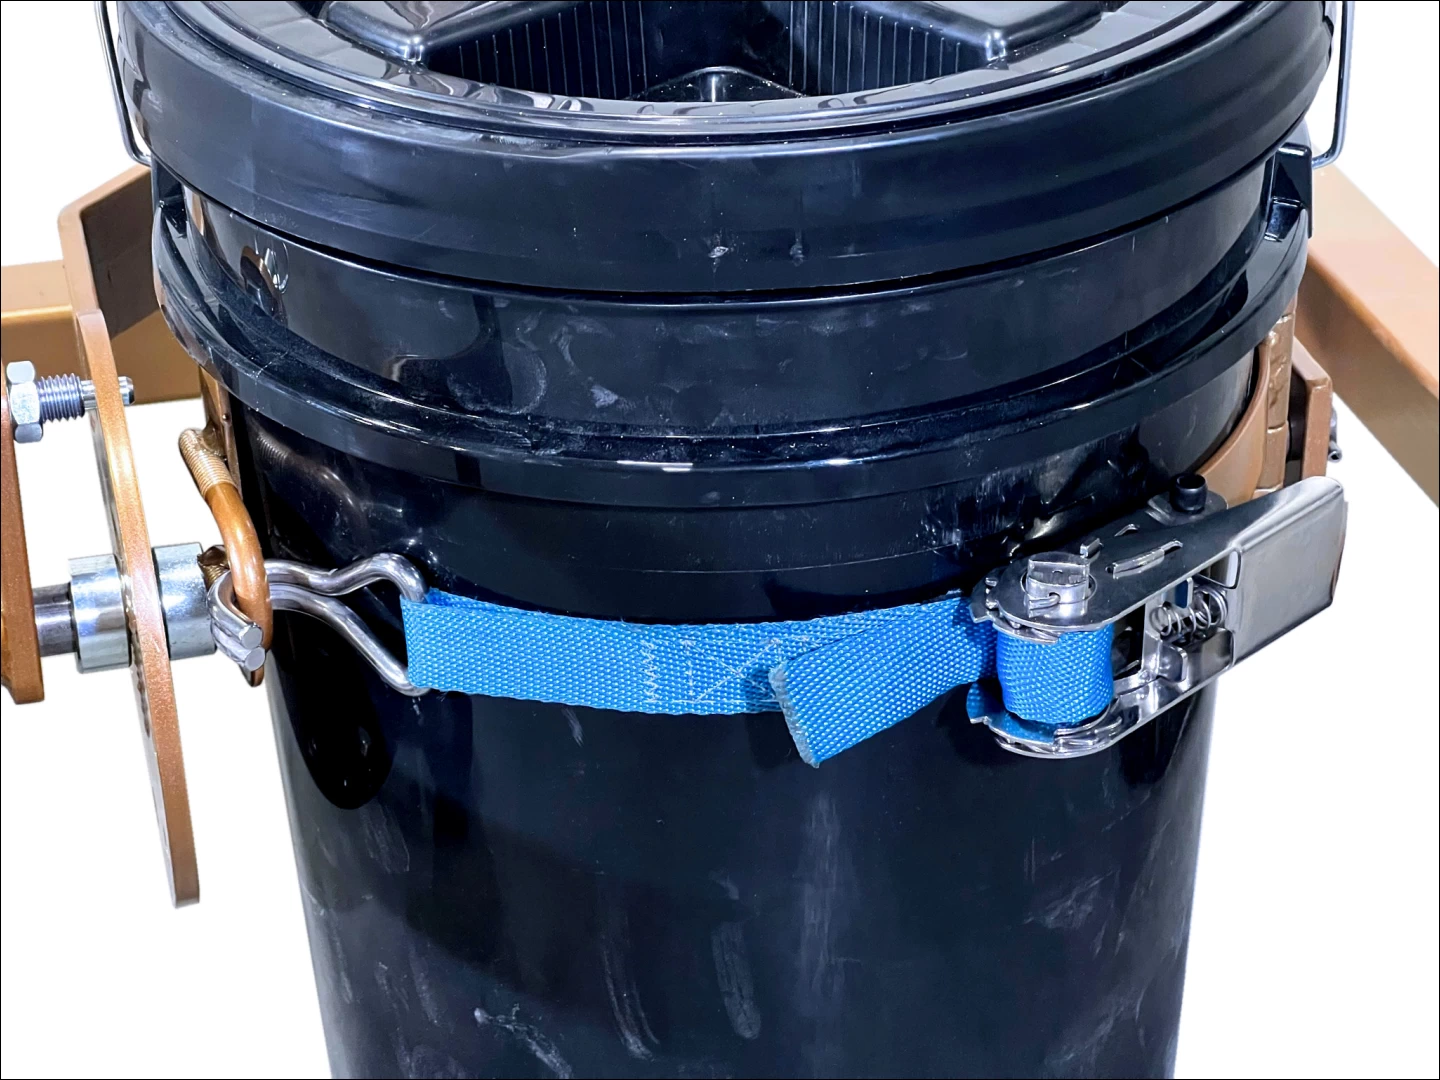 Web Strap and Ratchet to secure pail